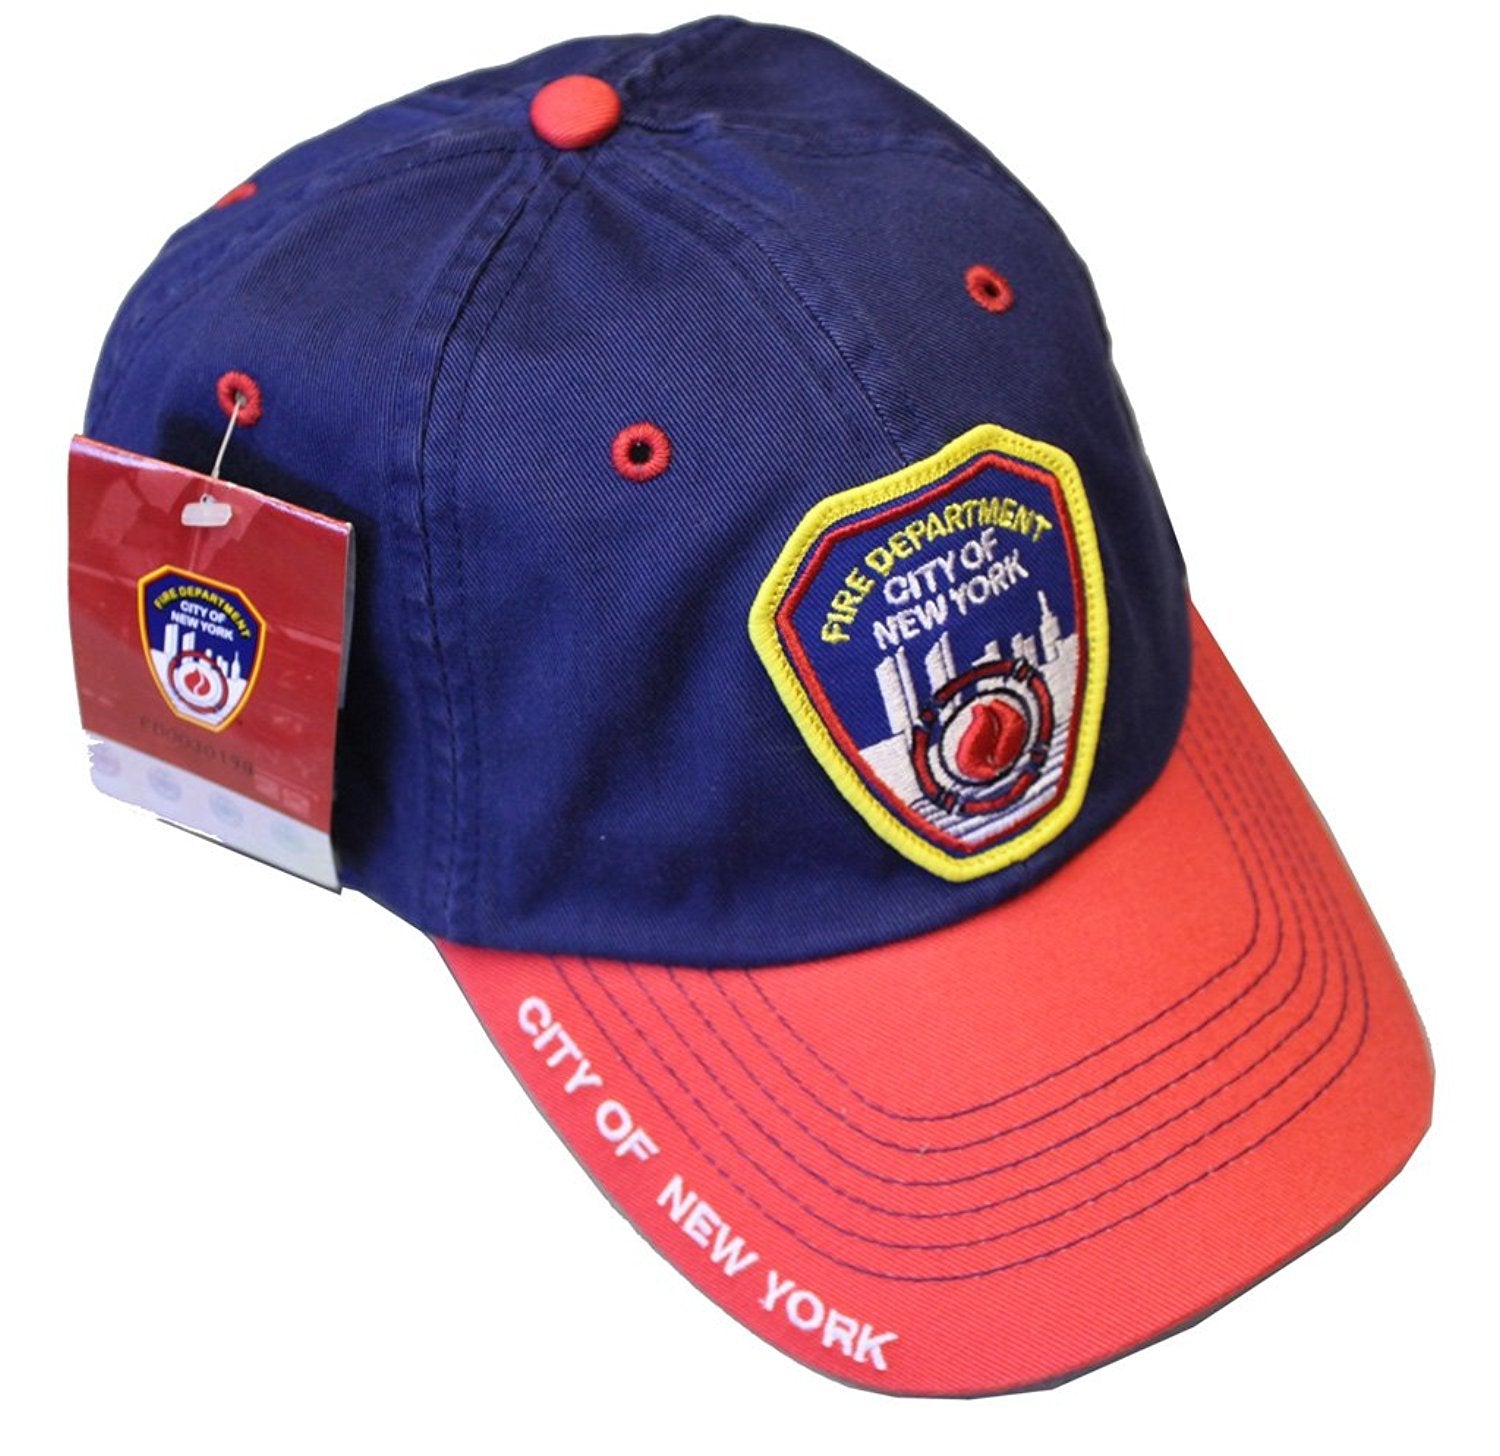 FDNY Baseball Hat Fire Department Of New York City Navy & Red One Size